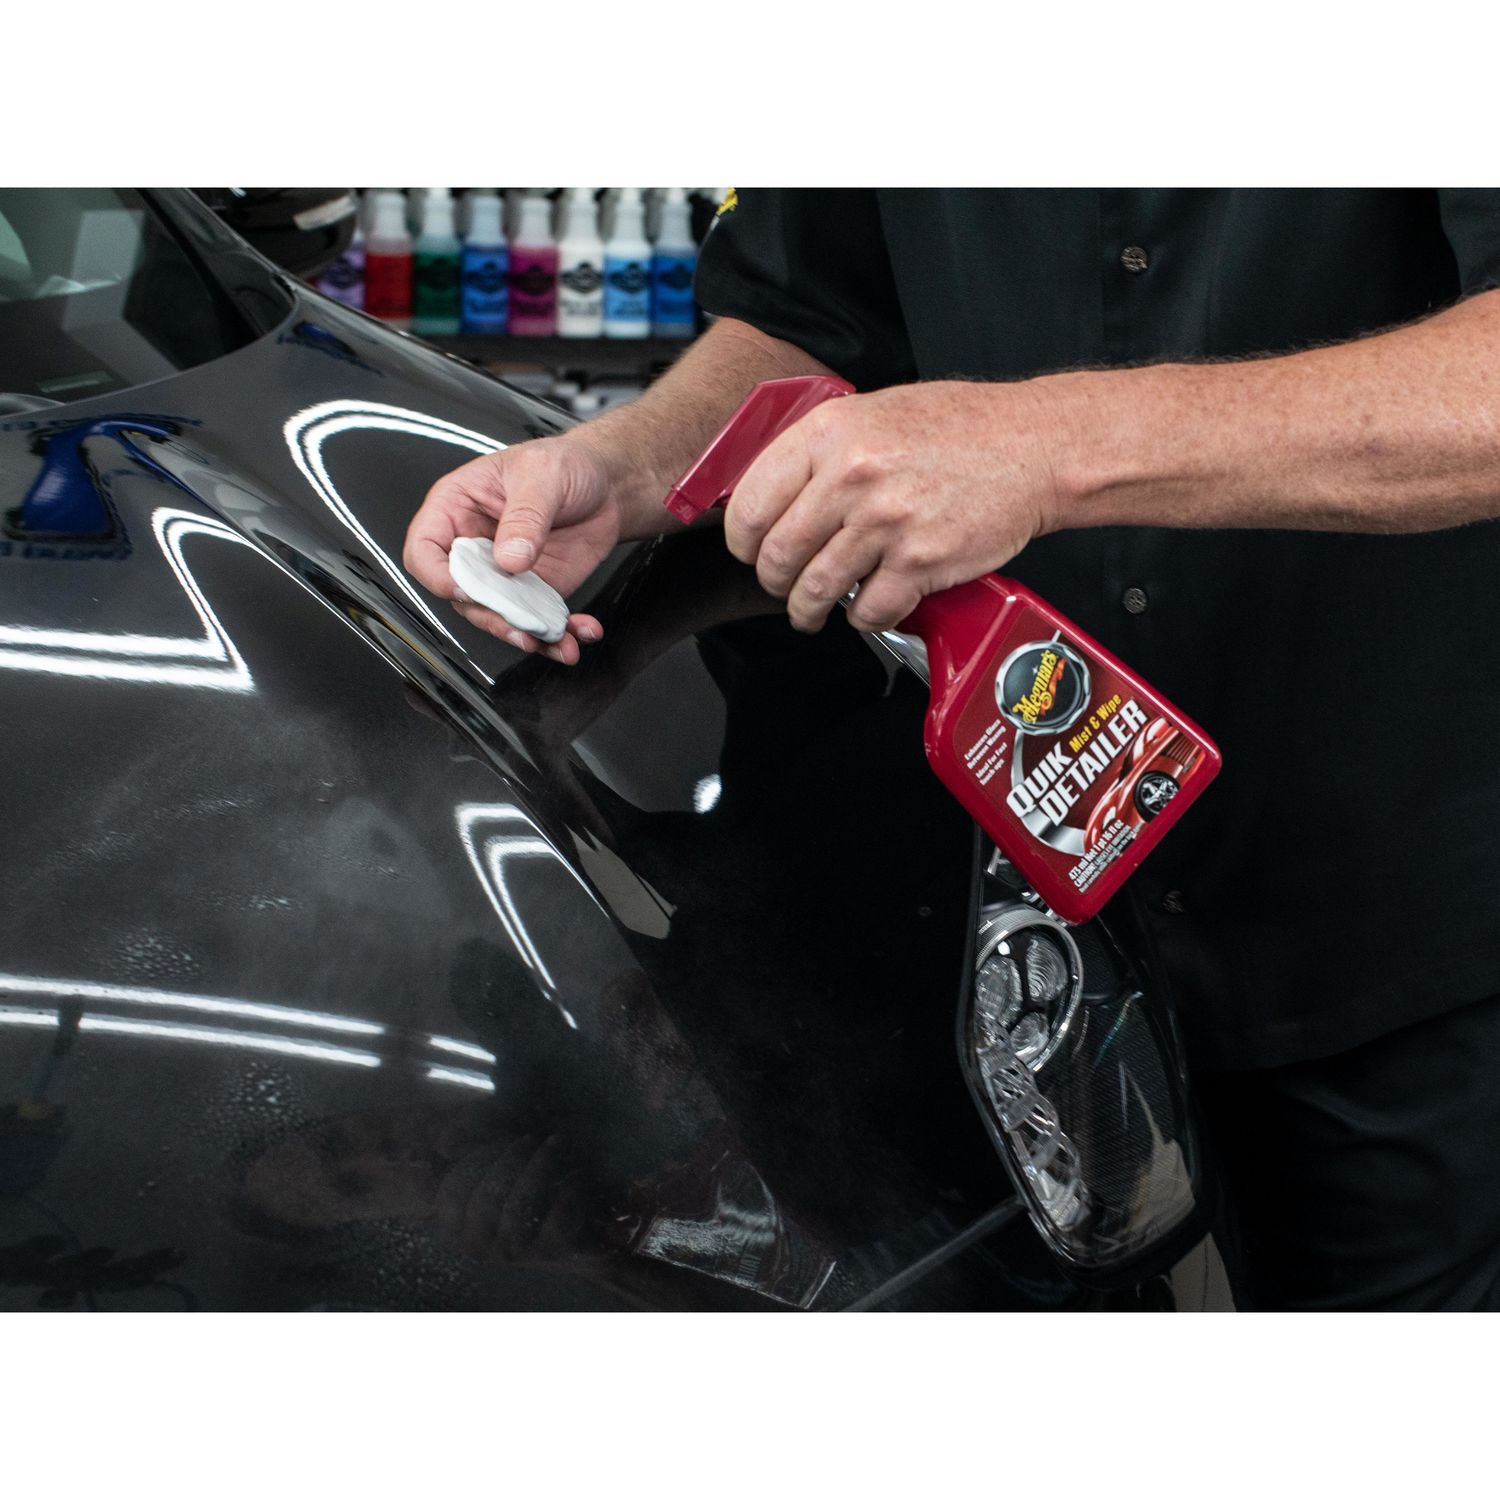 Meguiar's Quik Detailer, Mist & Wipe Car Detailing Spray, Clear Light Contaminants and Boost Shine with A Quick Detailer Spray That Keeps Paint and